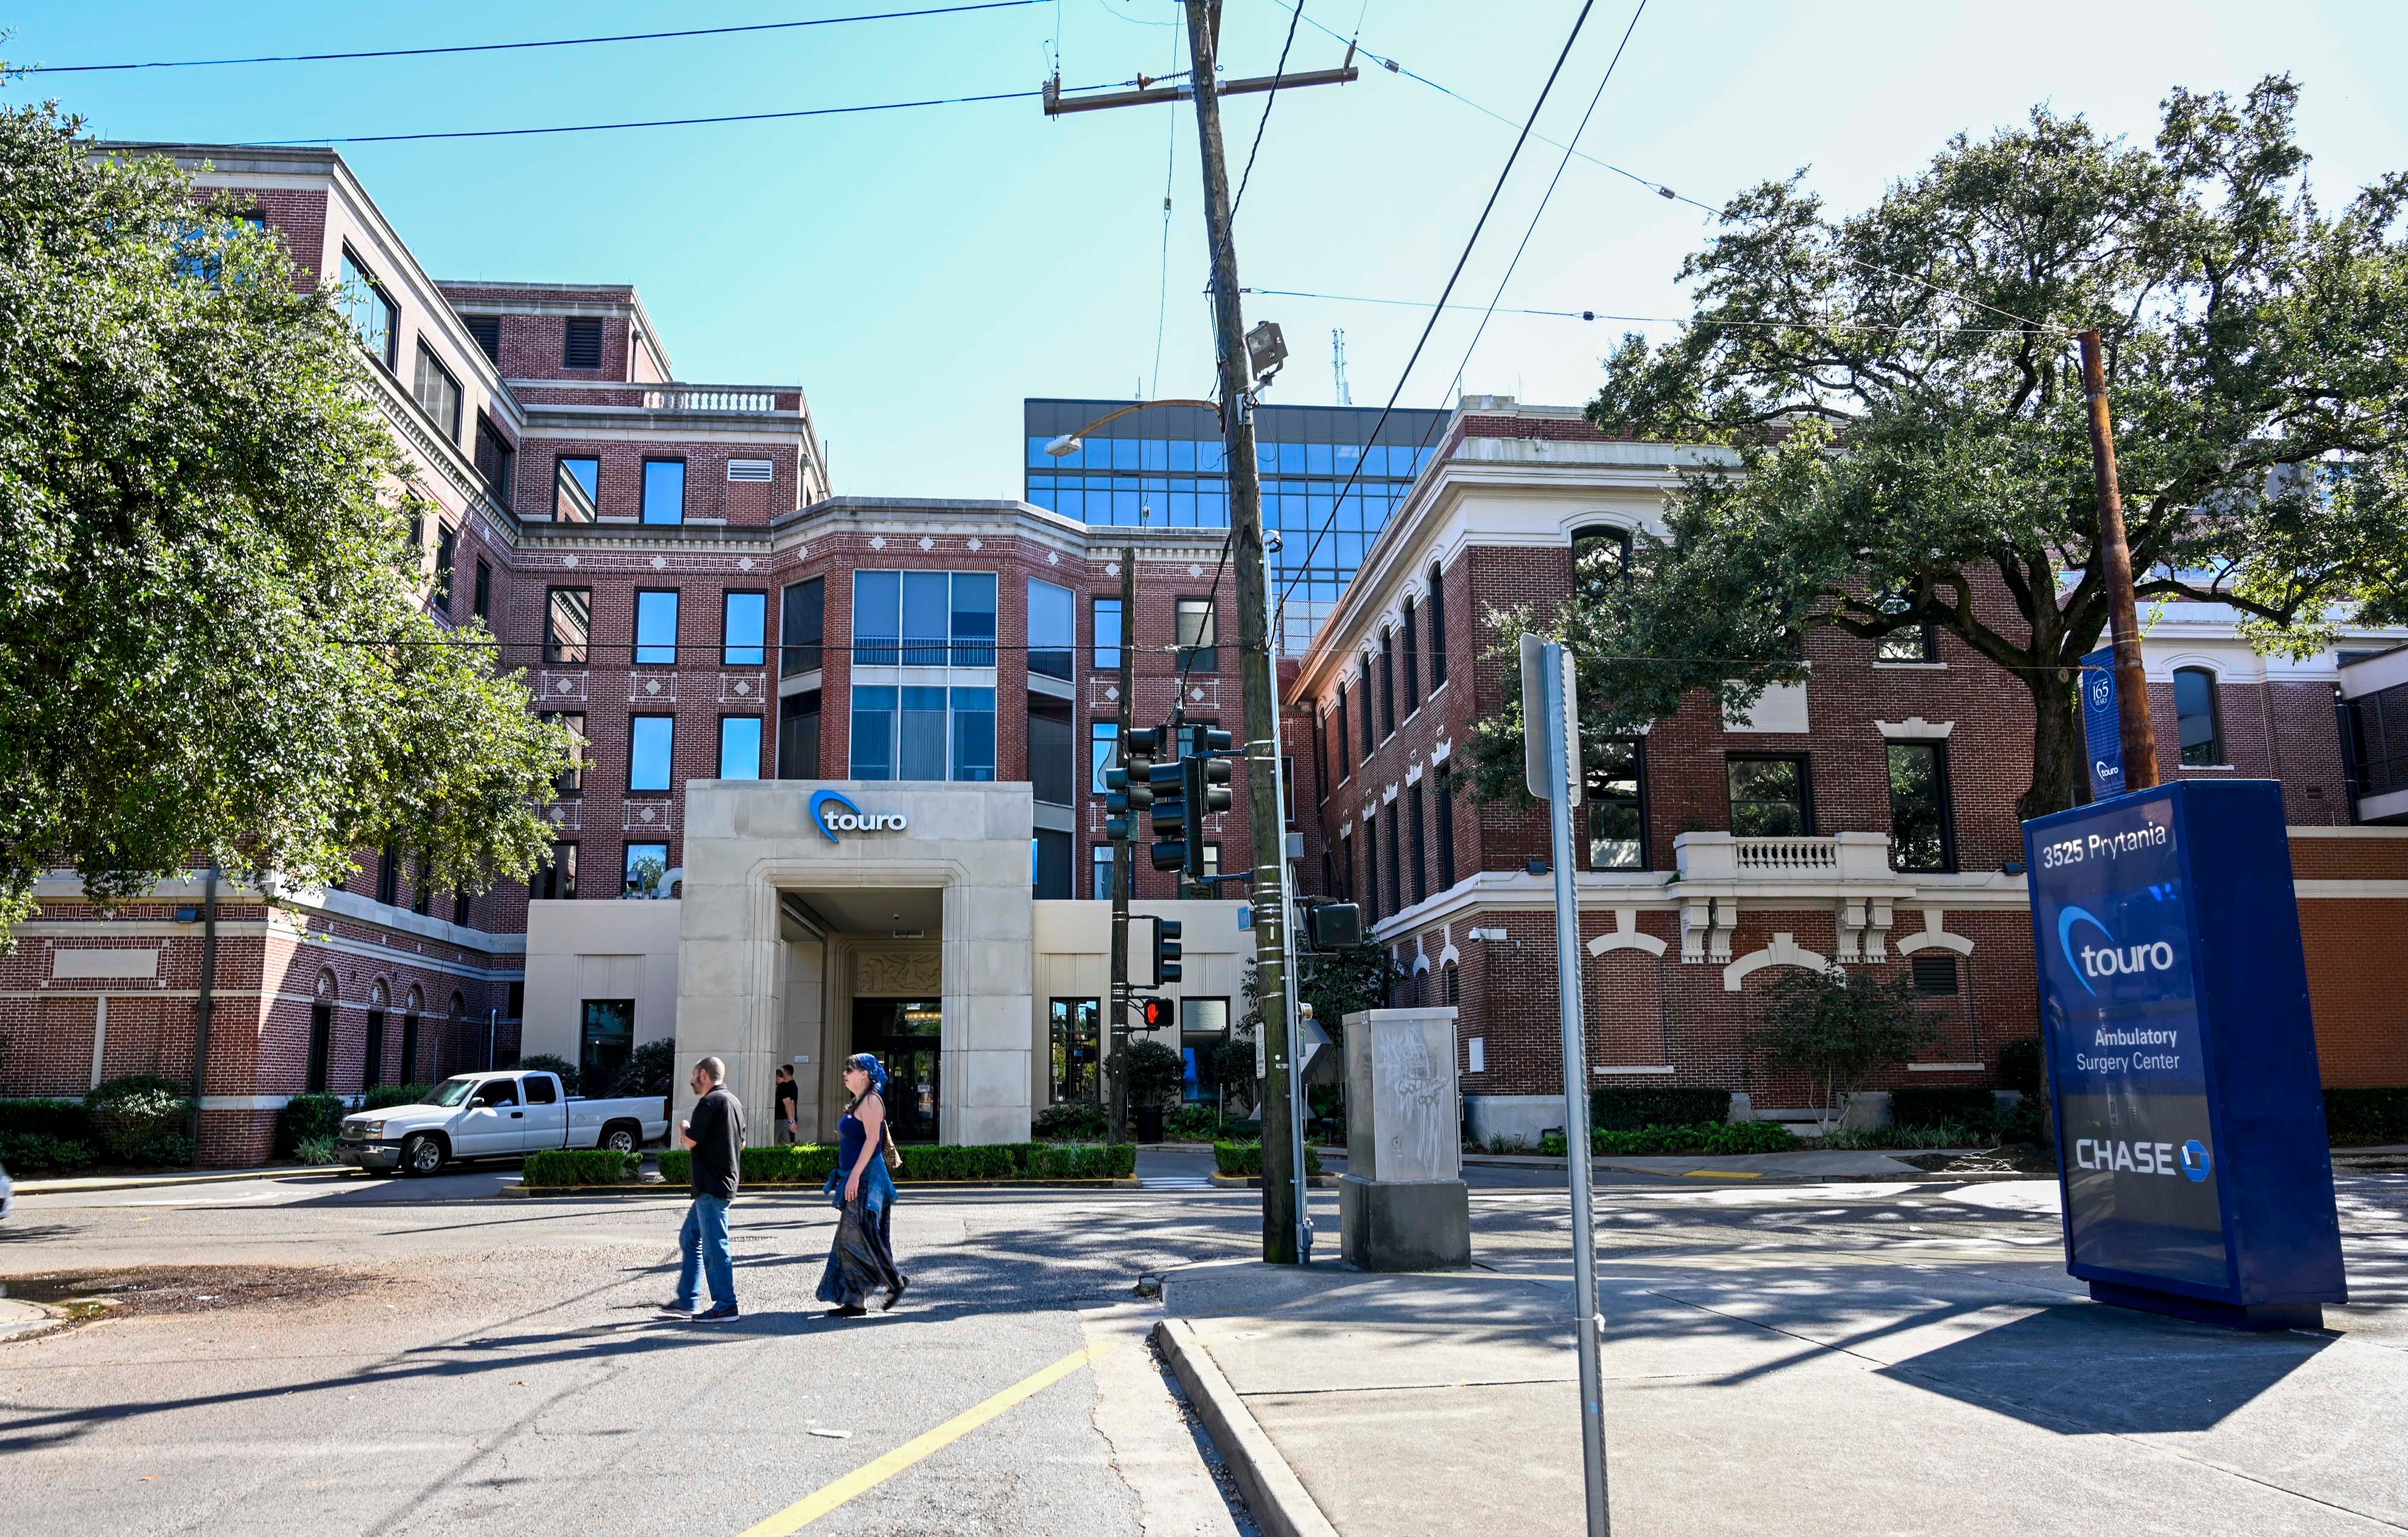 Touro Infirmary is known to many in New Orleans by its longtime slogan that it’s the place “Where babies come from.” It is among hospitals where USA TODAY found women are suffering severe childbirth complications at twice the rate of other hospitals.